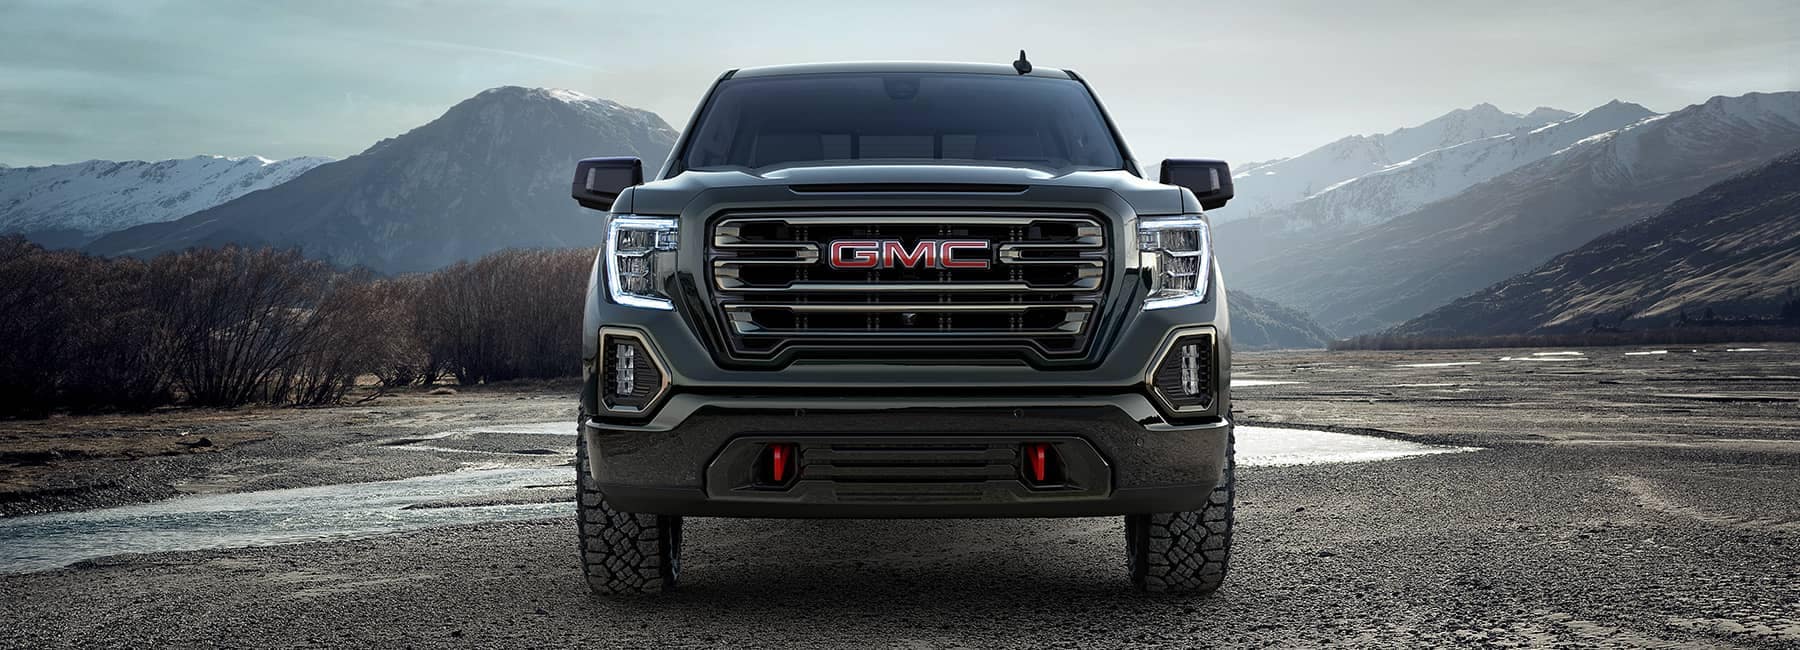 Onyx Black 2022 GMC Sierra 1500 with a mountain background_mobile